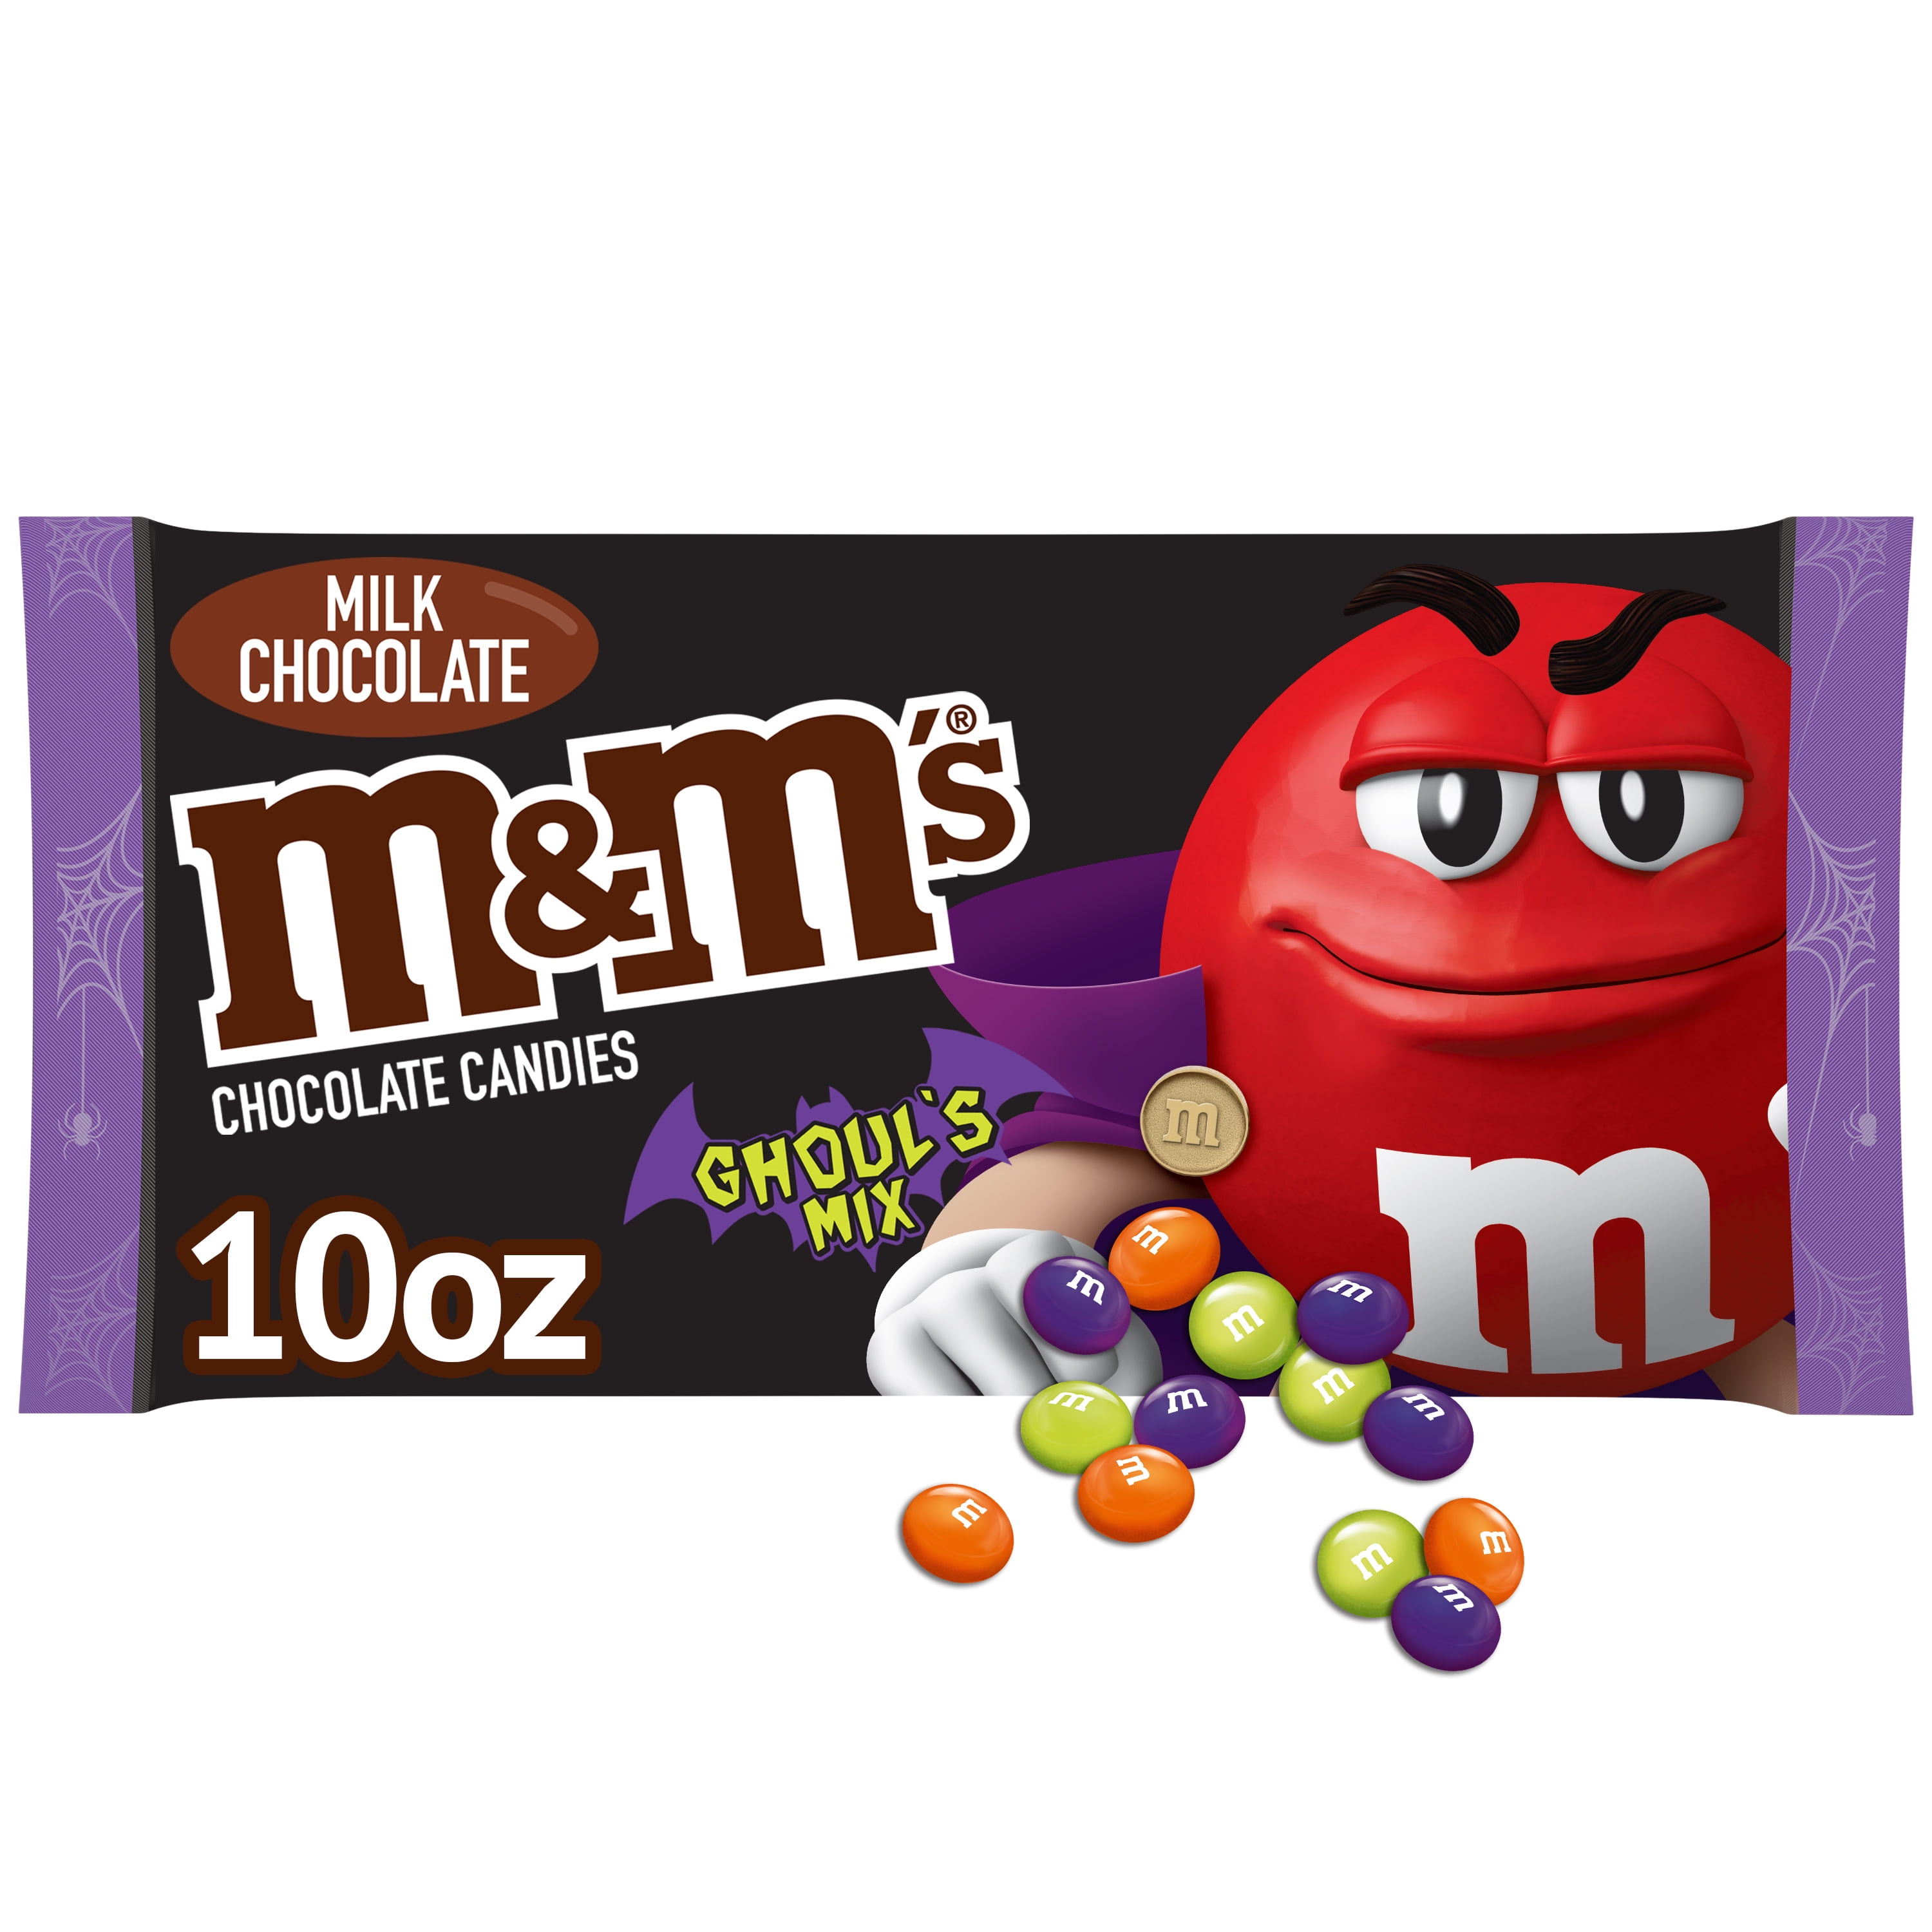 M&M's Chocolate Halloween Candy Fun Size Assorted Variety Mix Bag, 5.3 lbs 150 Pieces